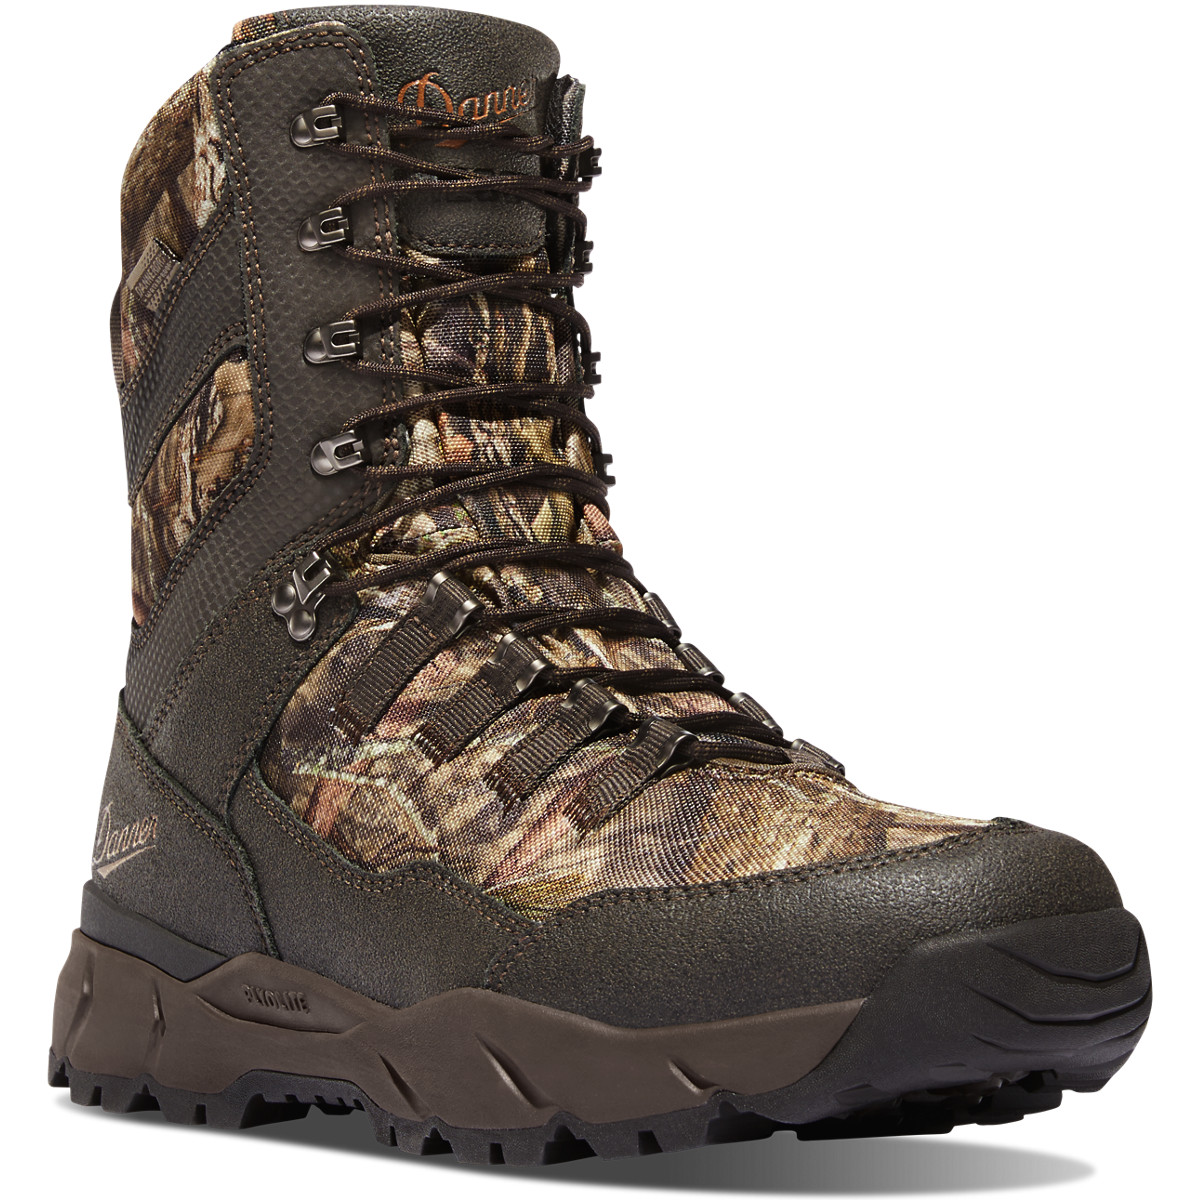 Danner Mens Vital 1200G Hunting Boots Camo - ORG802673